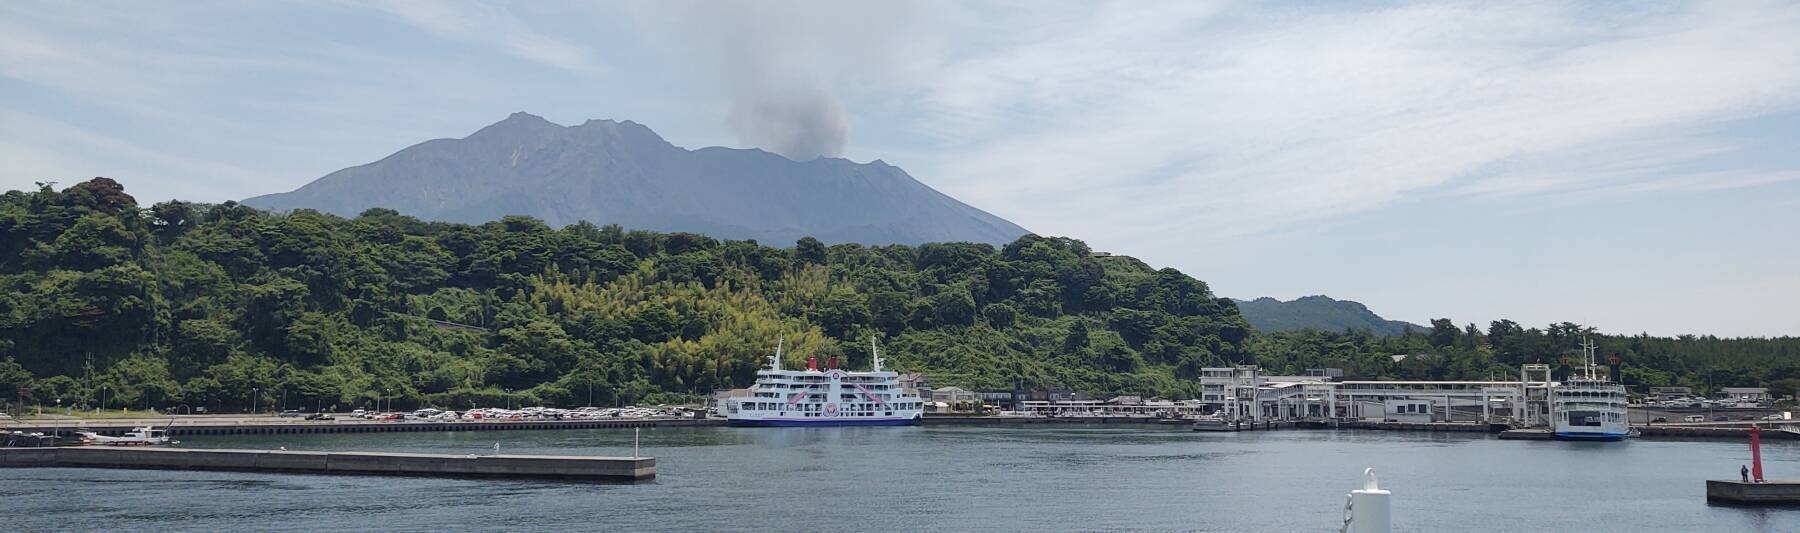 Ferry port with Sakurajima volcano in the distance, an ash plume rising from the southern peak.